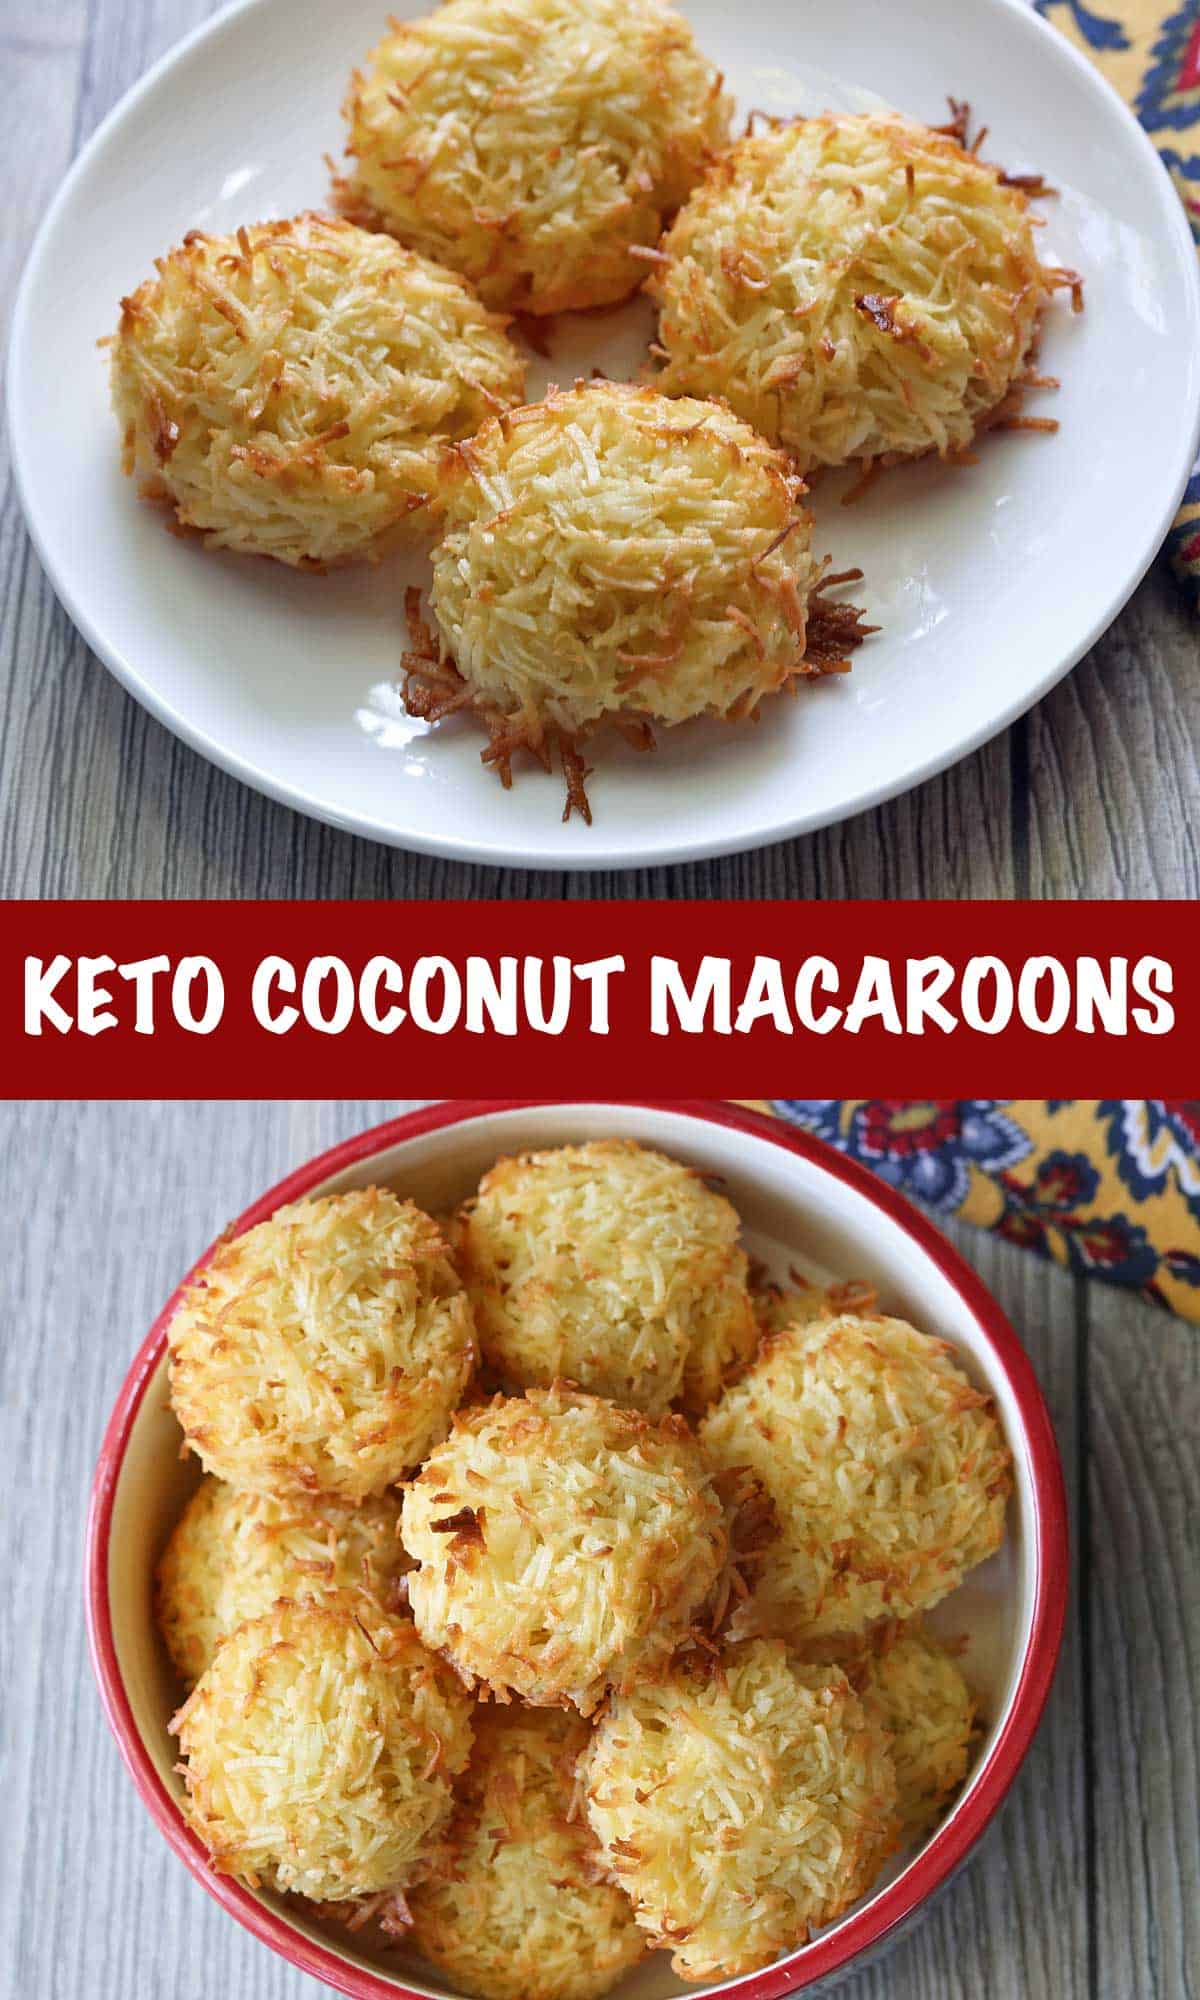 A two-photo collage of coconut macaroons, served on a plate and in a bowl.